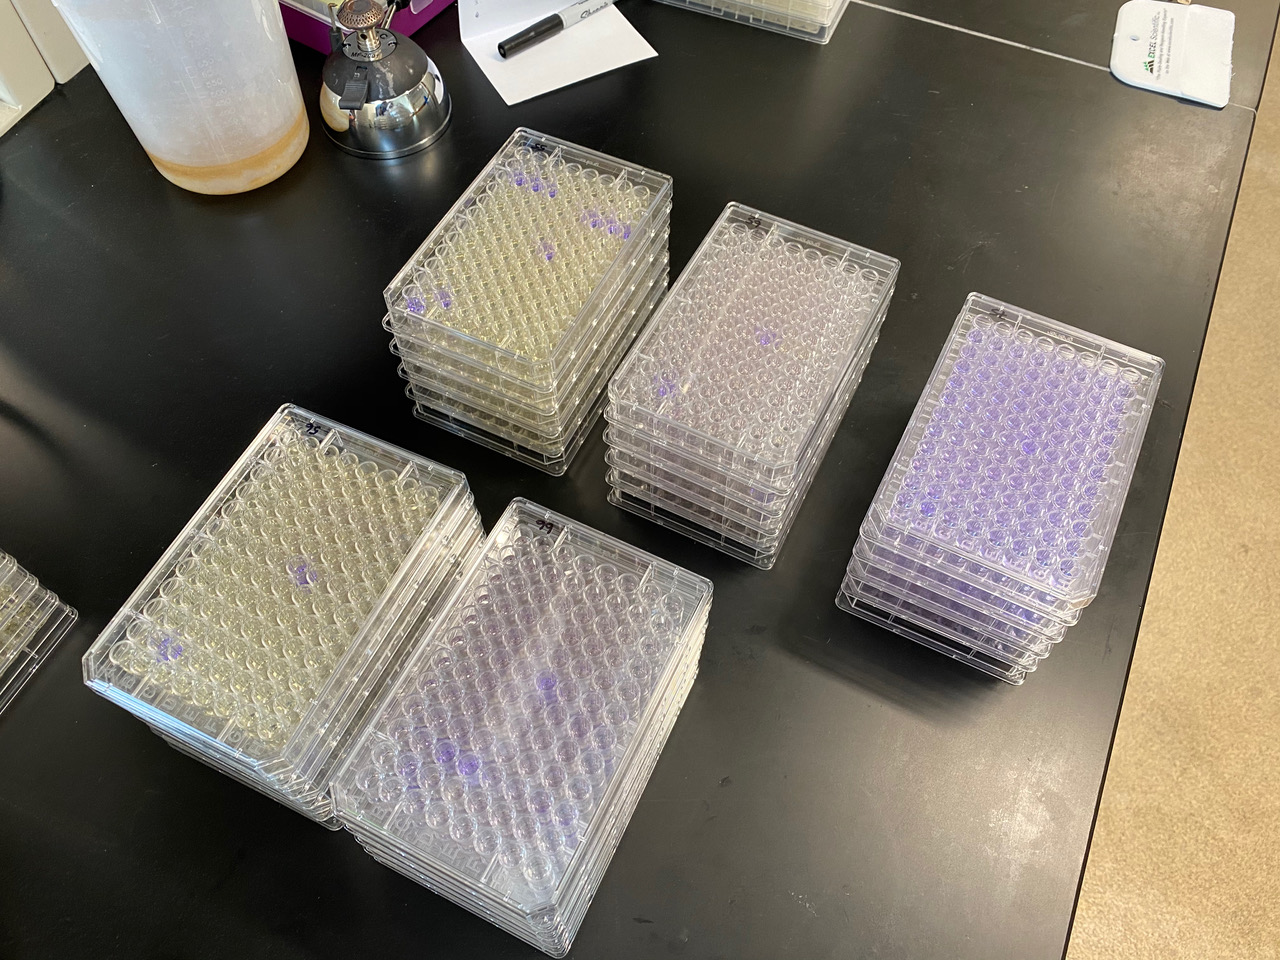 microplates in a testing lab